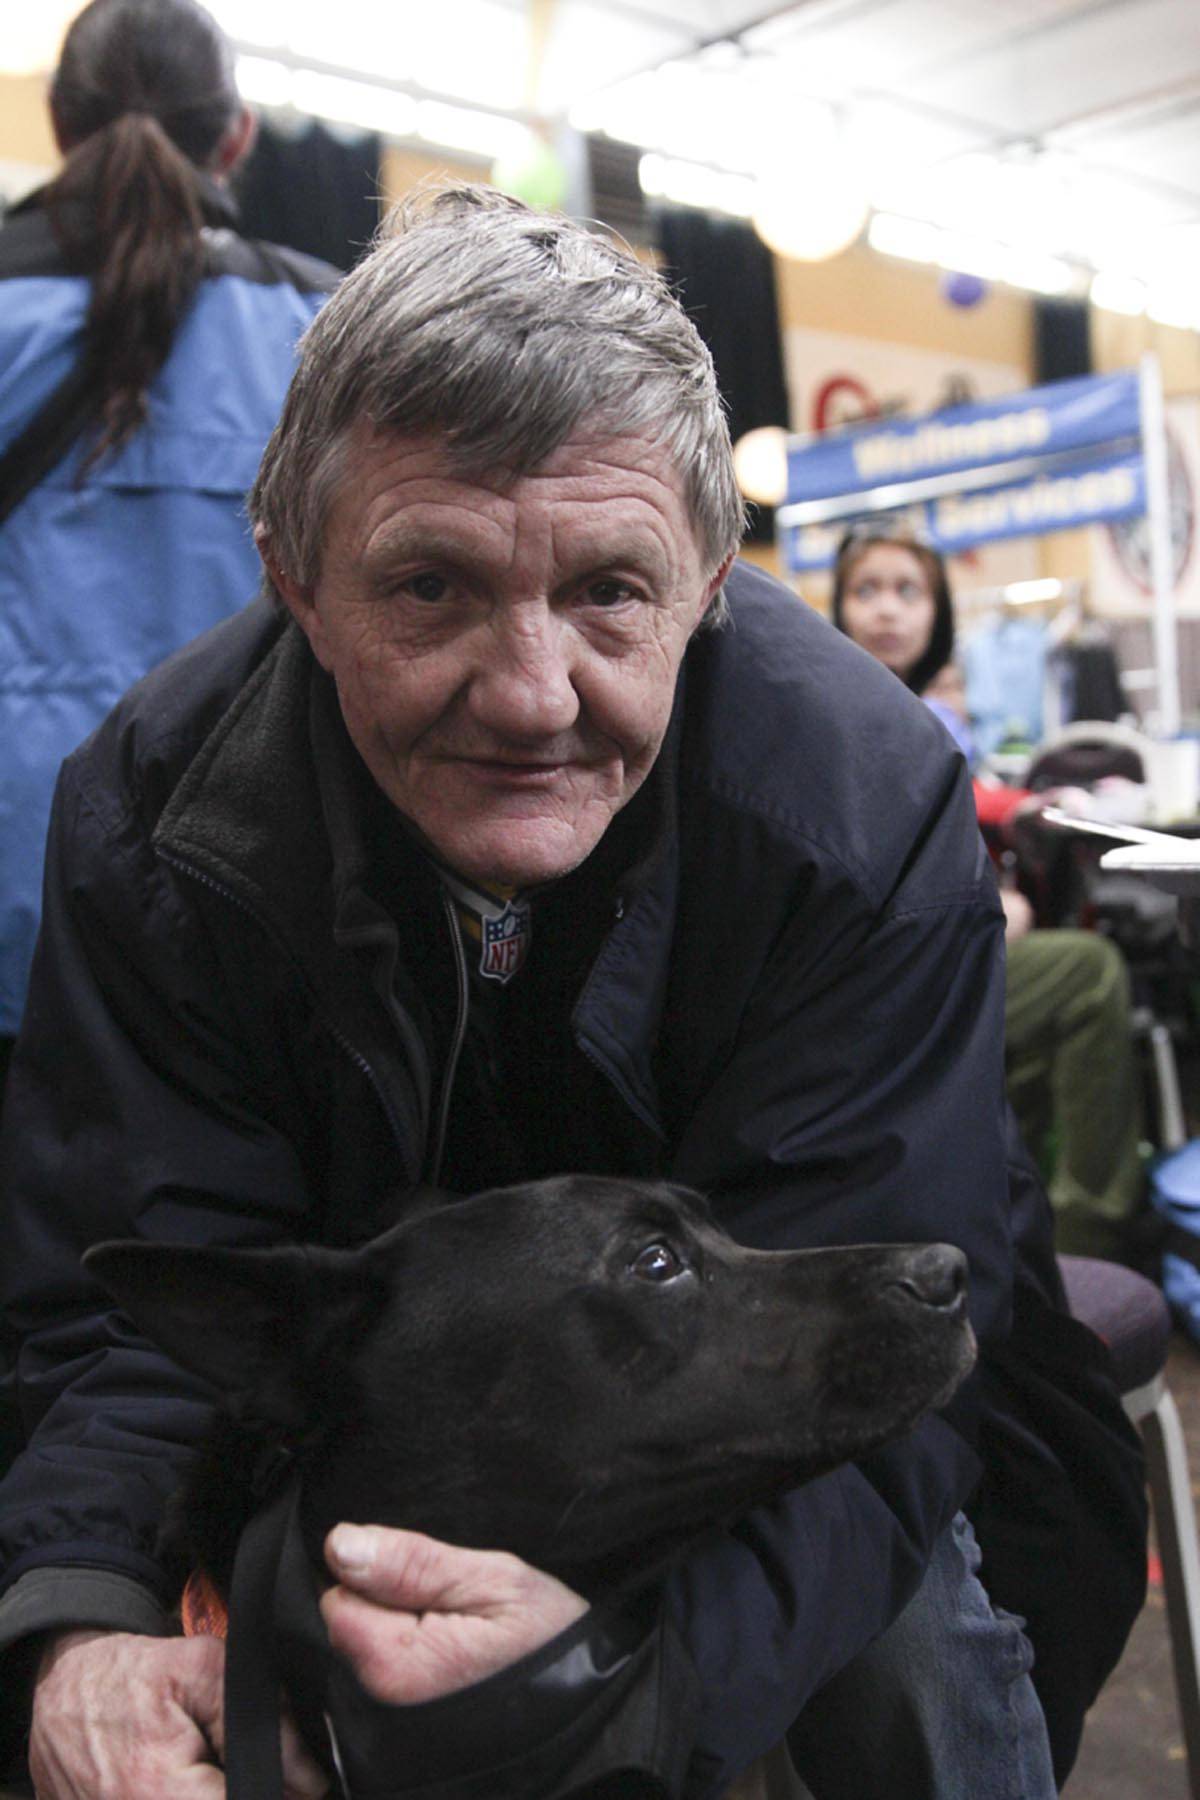 Cary Shilts, a guest, poses with his dog at the Juneau Coalition for Housing and Homelessness’ 9th annual Homeless Connect event at the Juneau Arts and Culture Center, Jan. 29, 2020. (Michael S. Lockett | Juneau Empire)